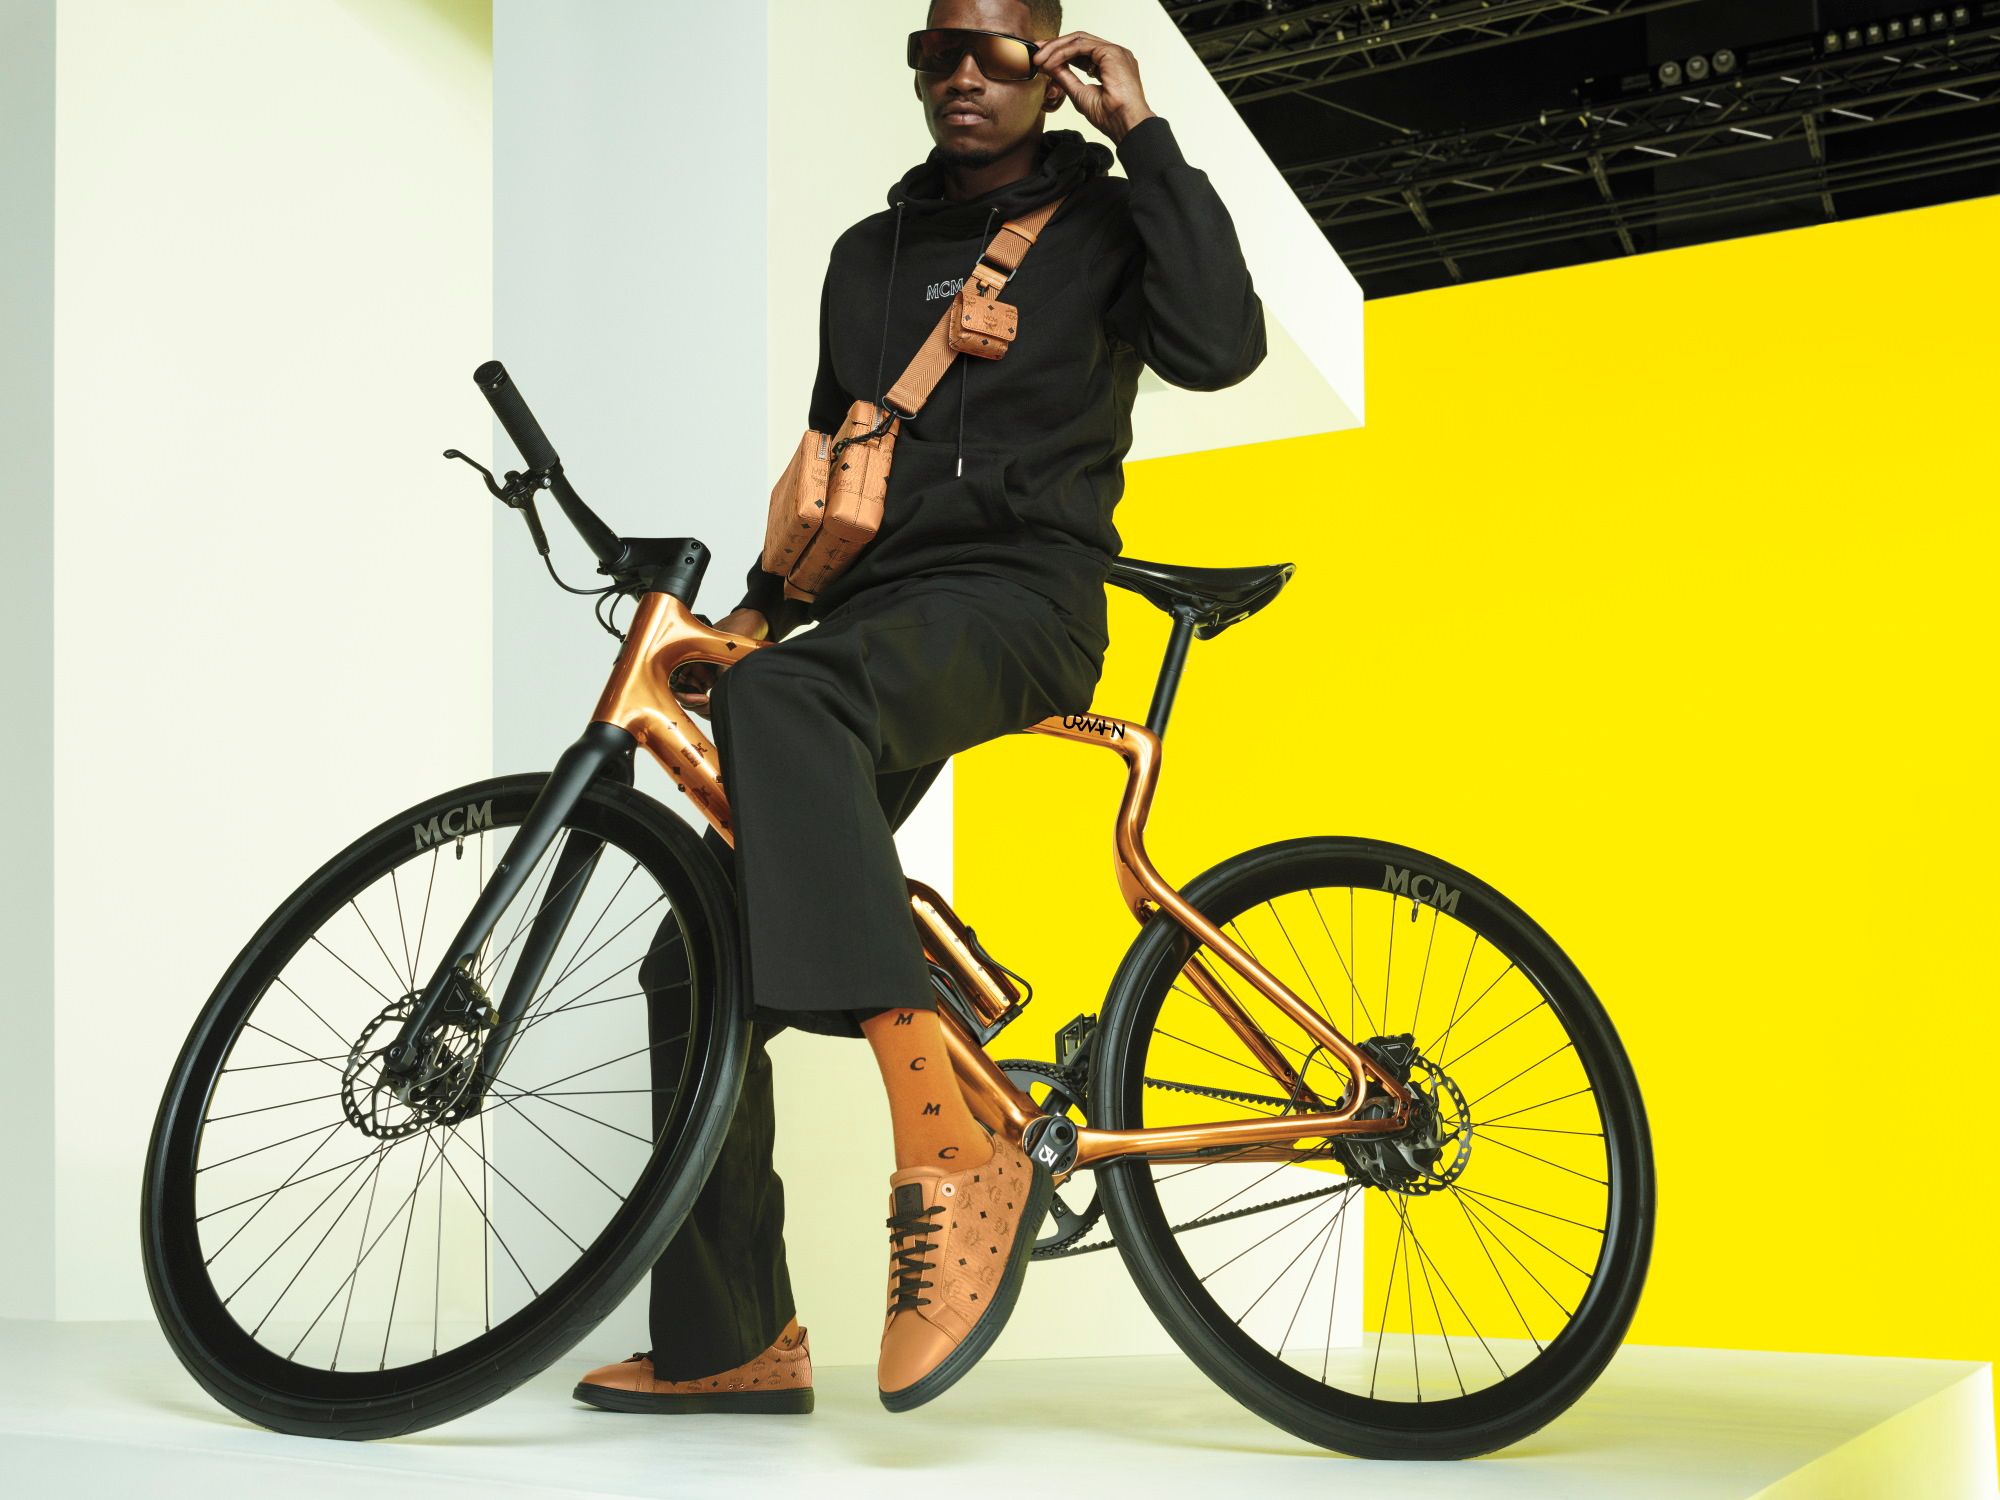 The MCM x URWAHN E-Bike Is A Perfect Blend Of Luxury And Mobility